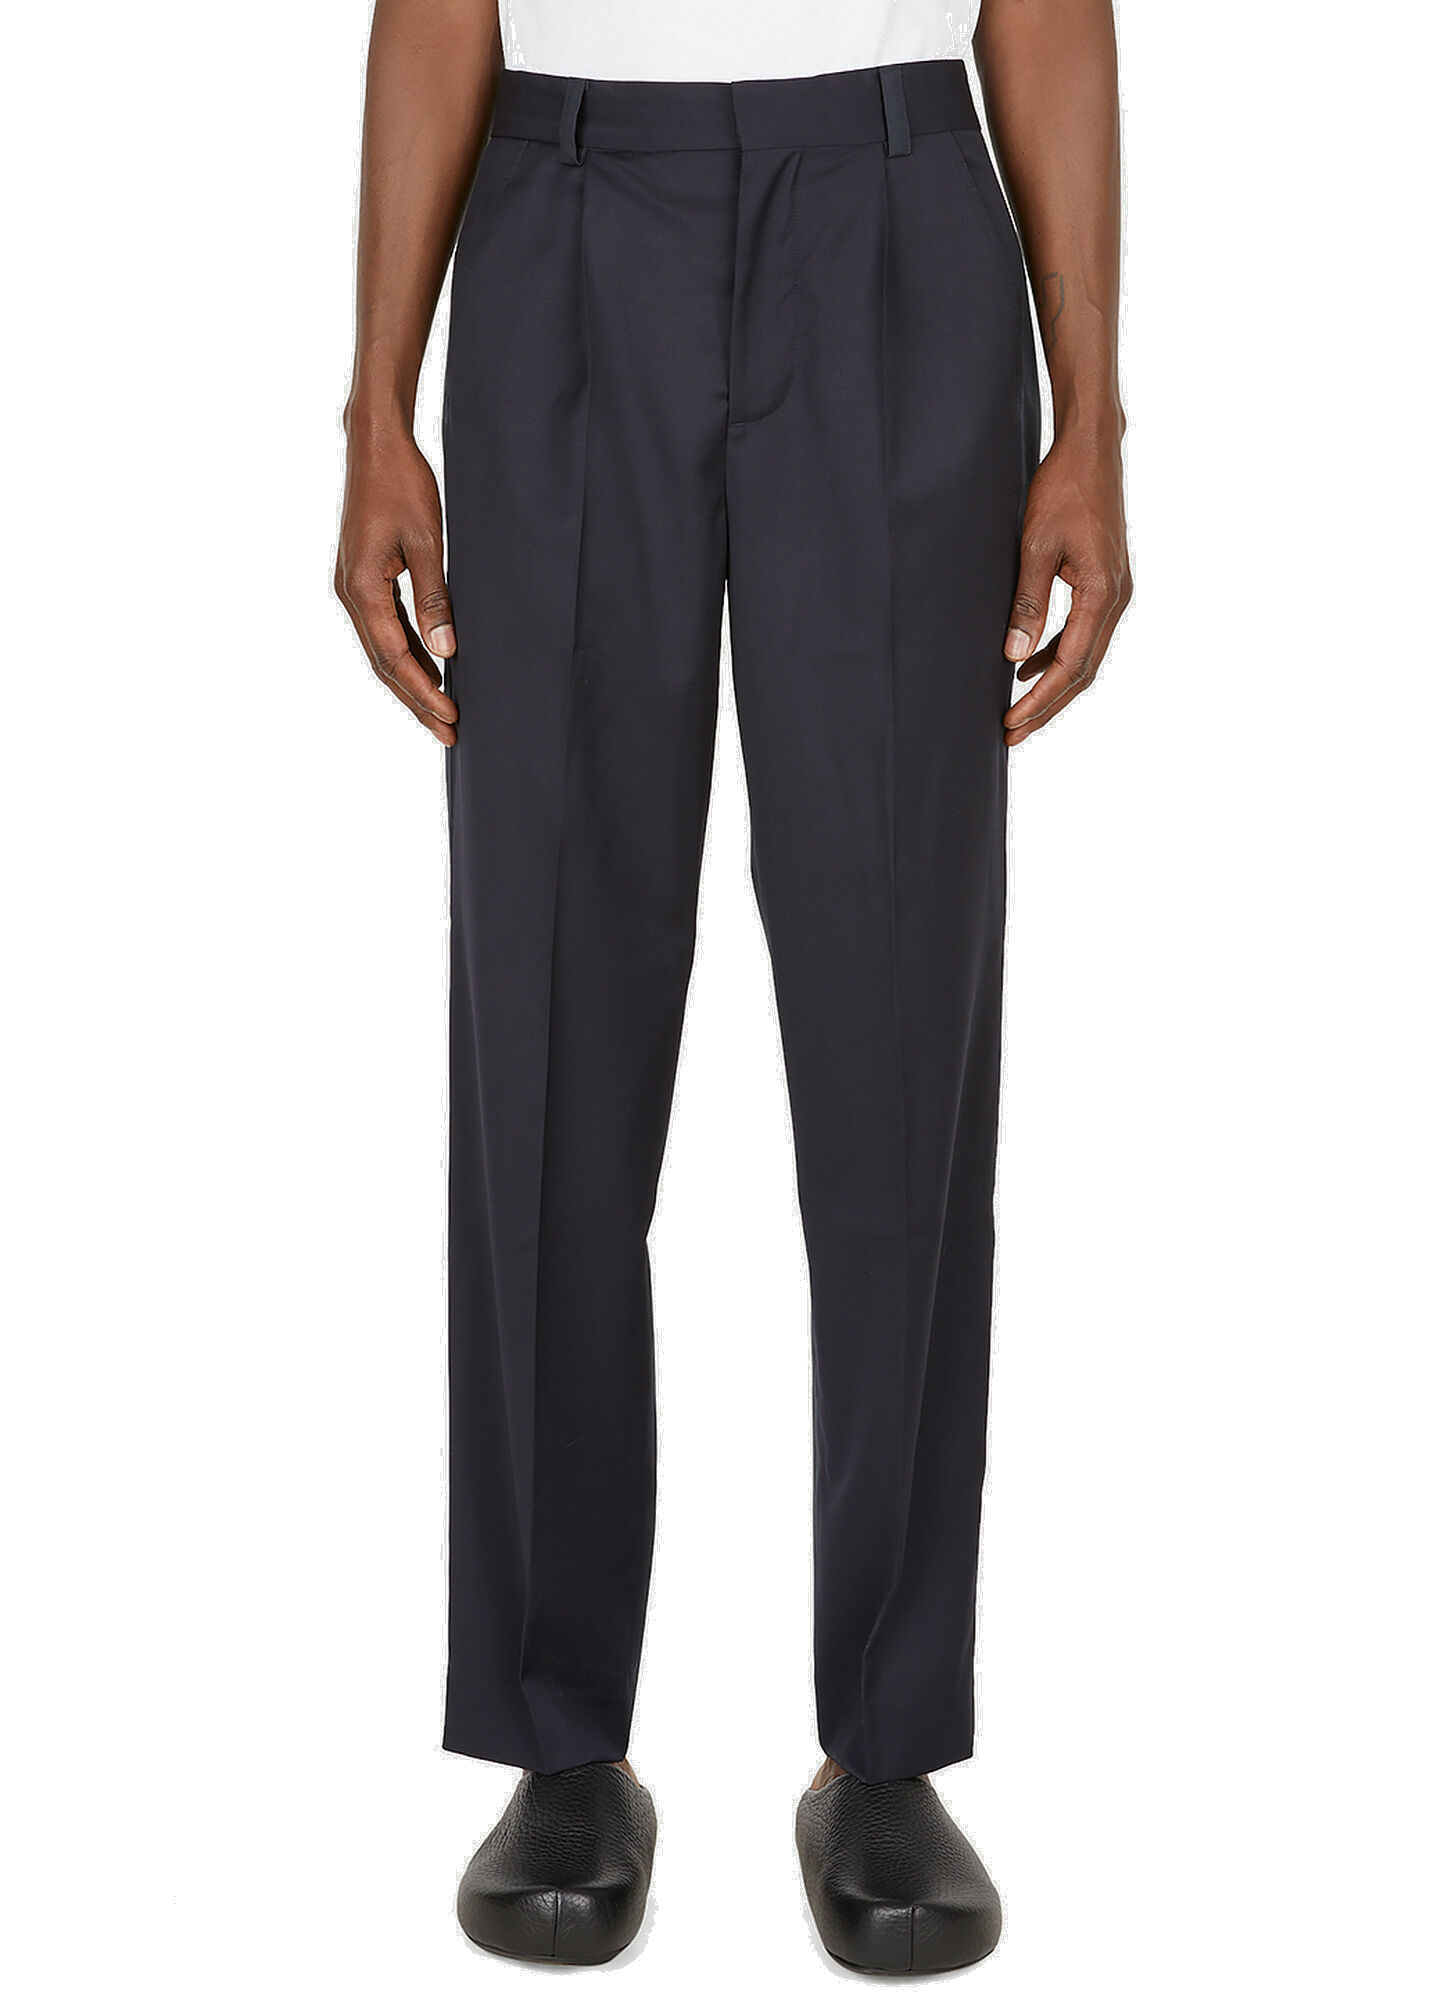 Tailored Contrast Panel Pants in Blue ANOTHER ASPECT